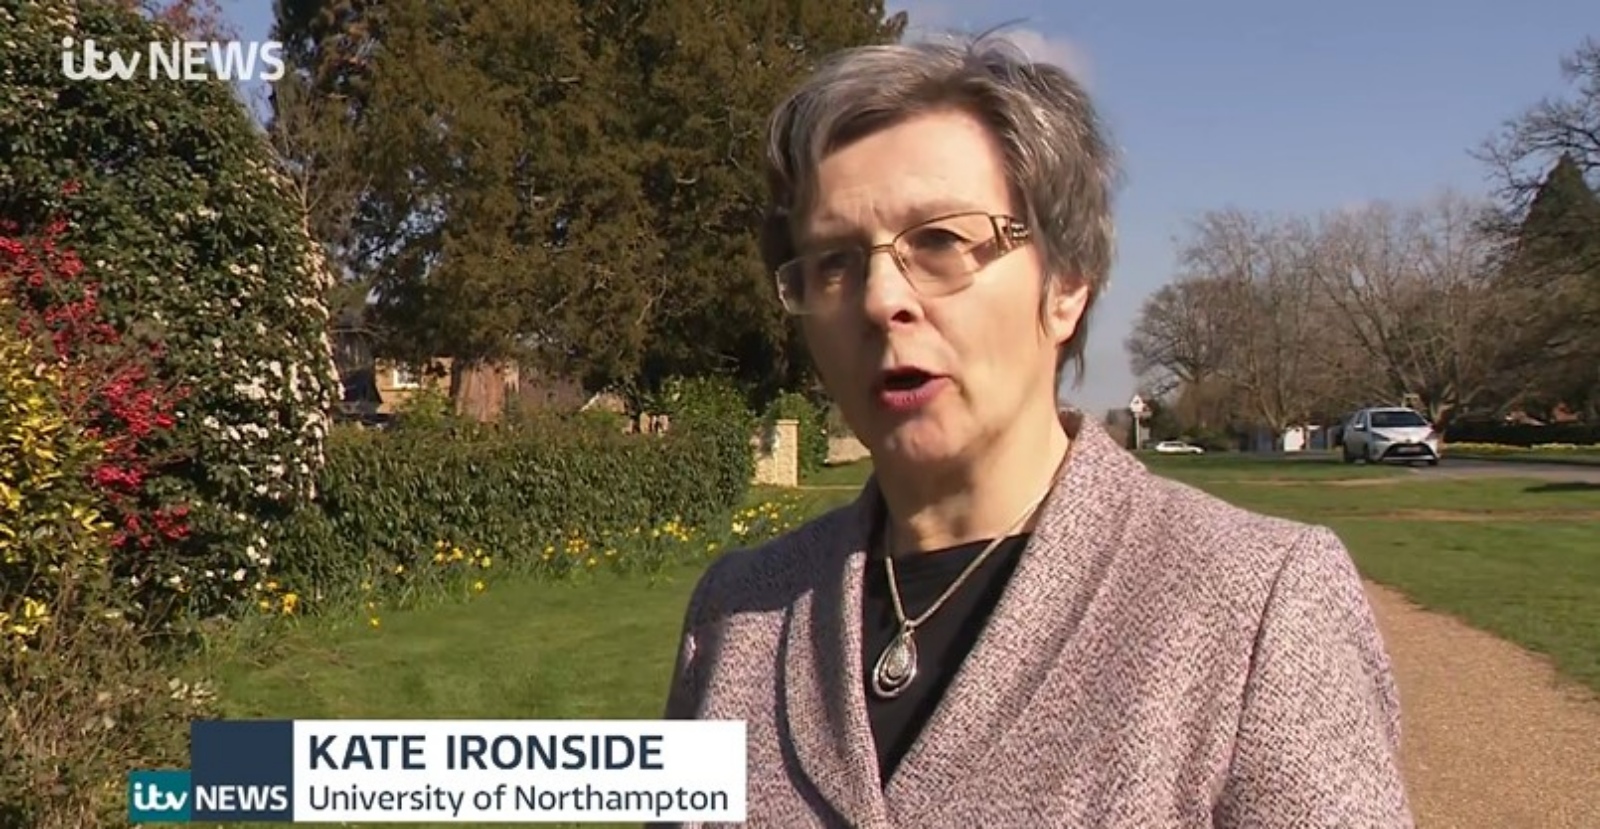 In the news image of Kate Ironside